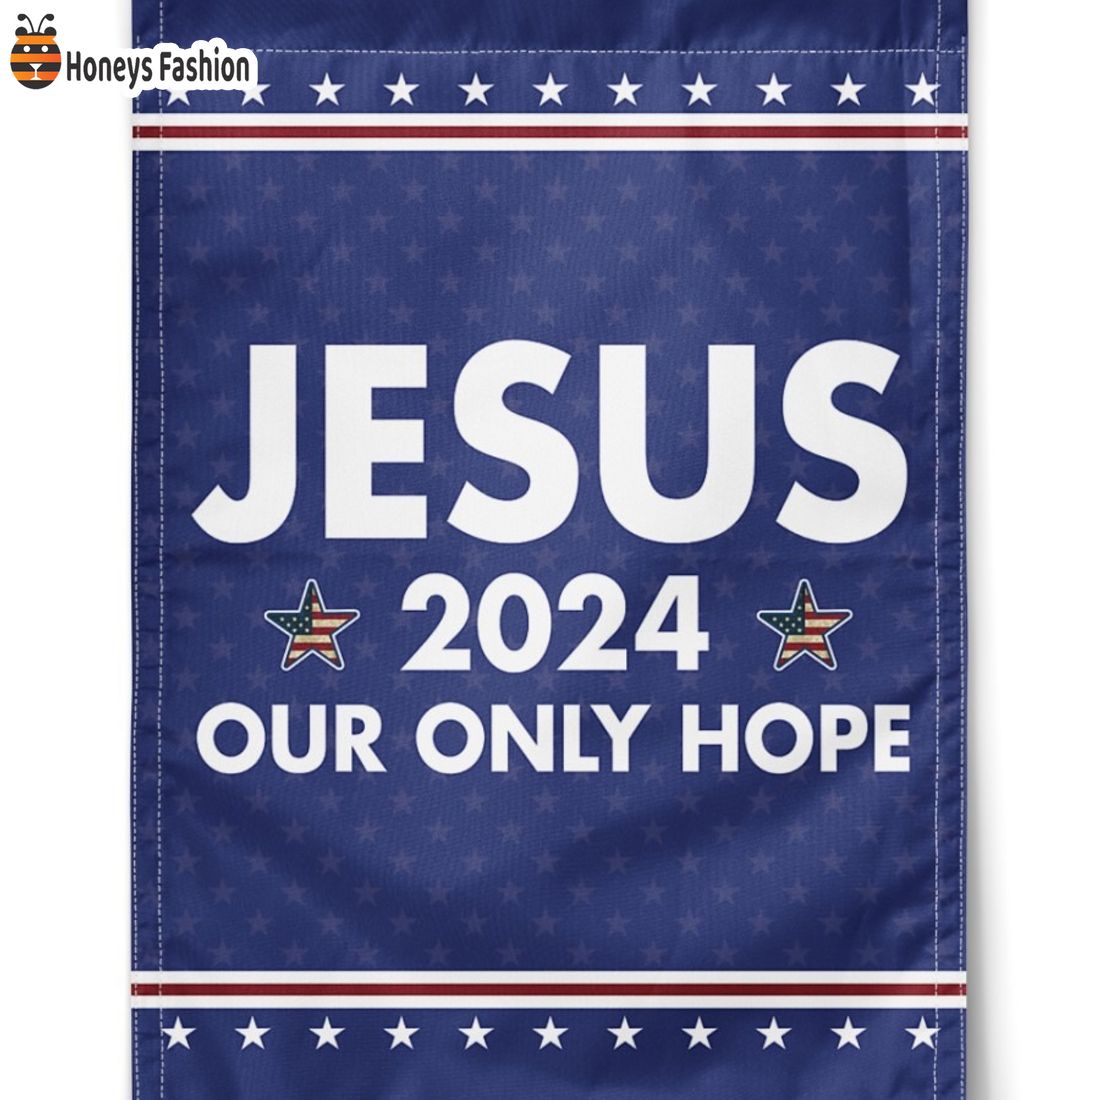 Jesus 2024 our only hope flag